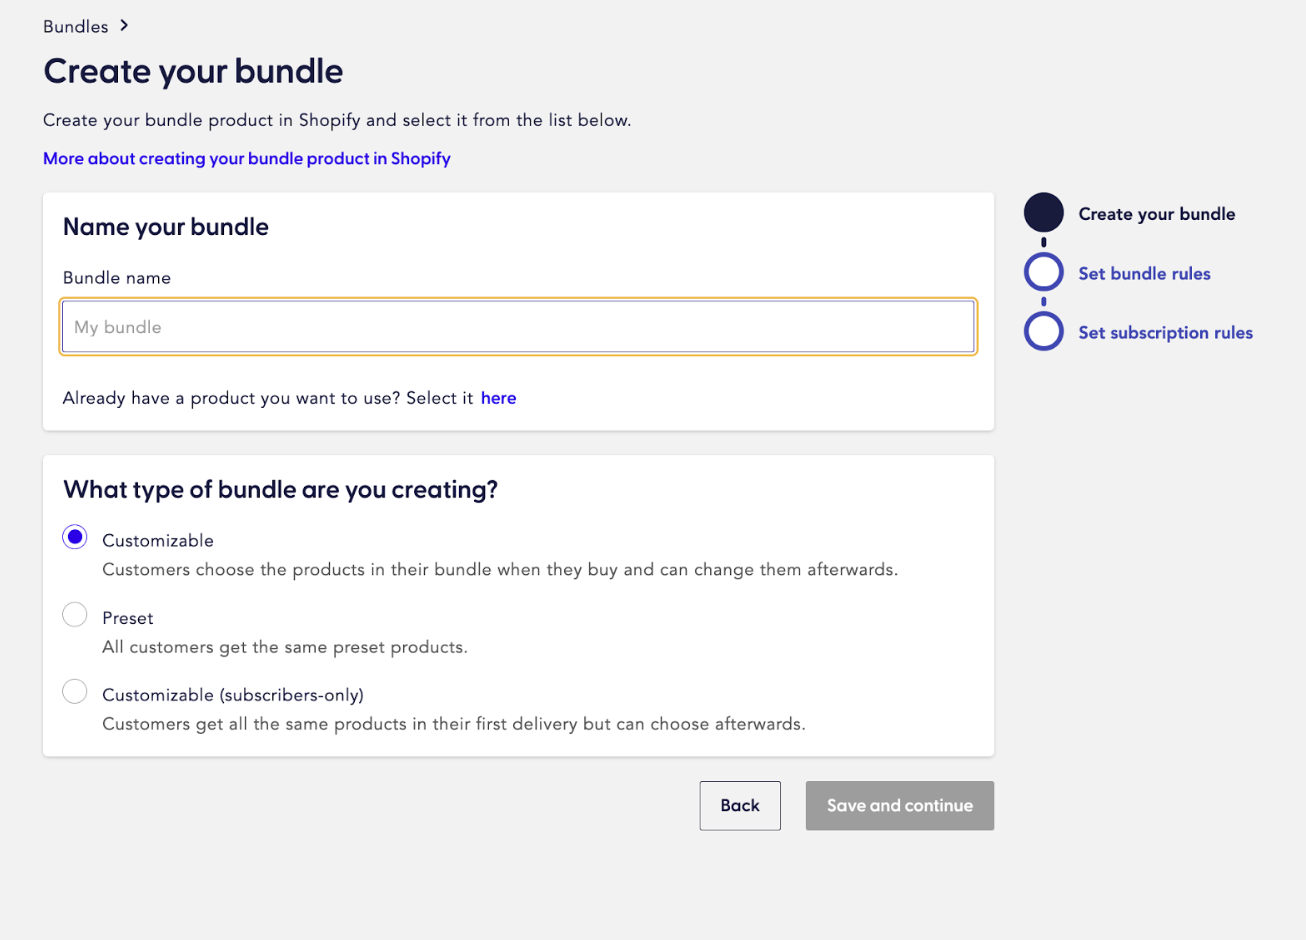 The Create your bundle page in Recharge